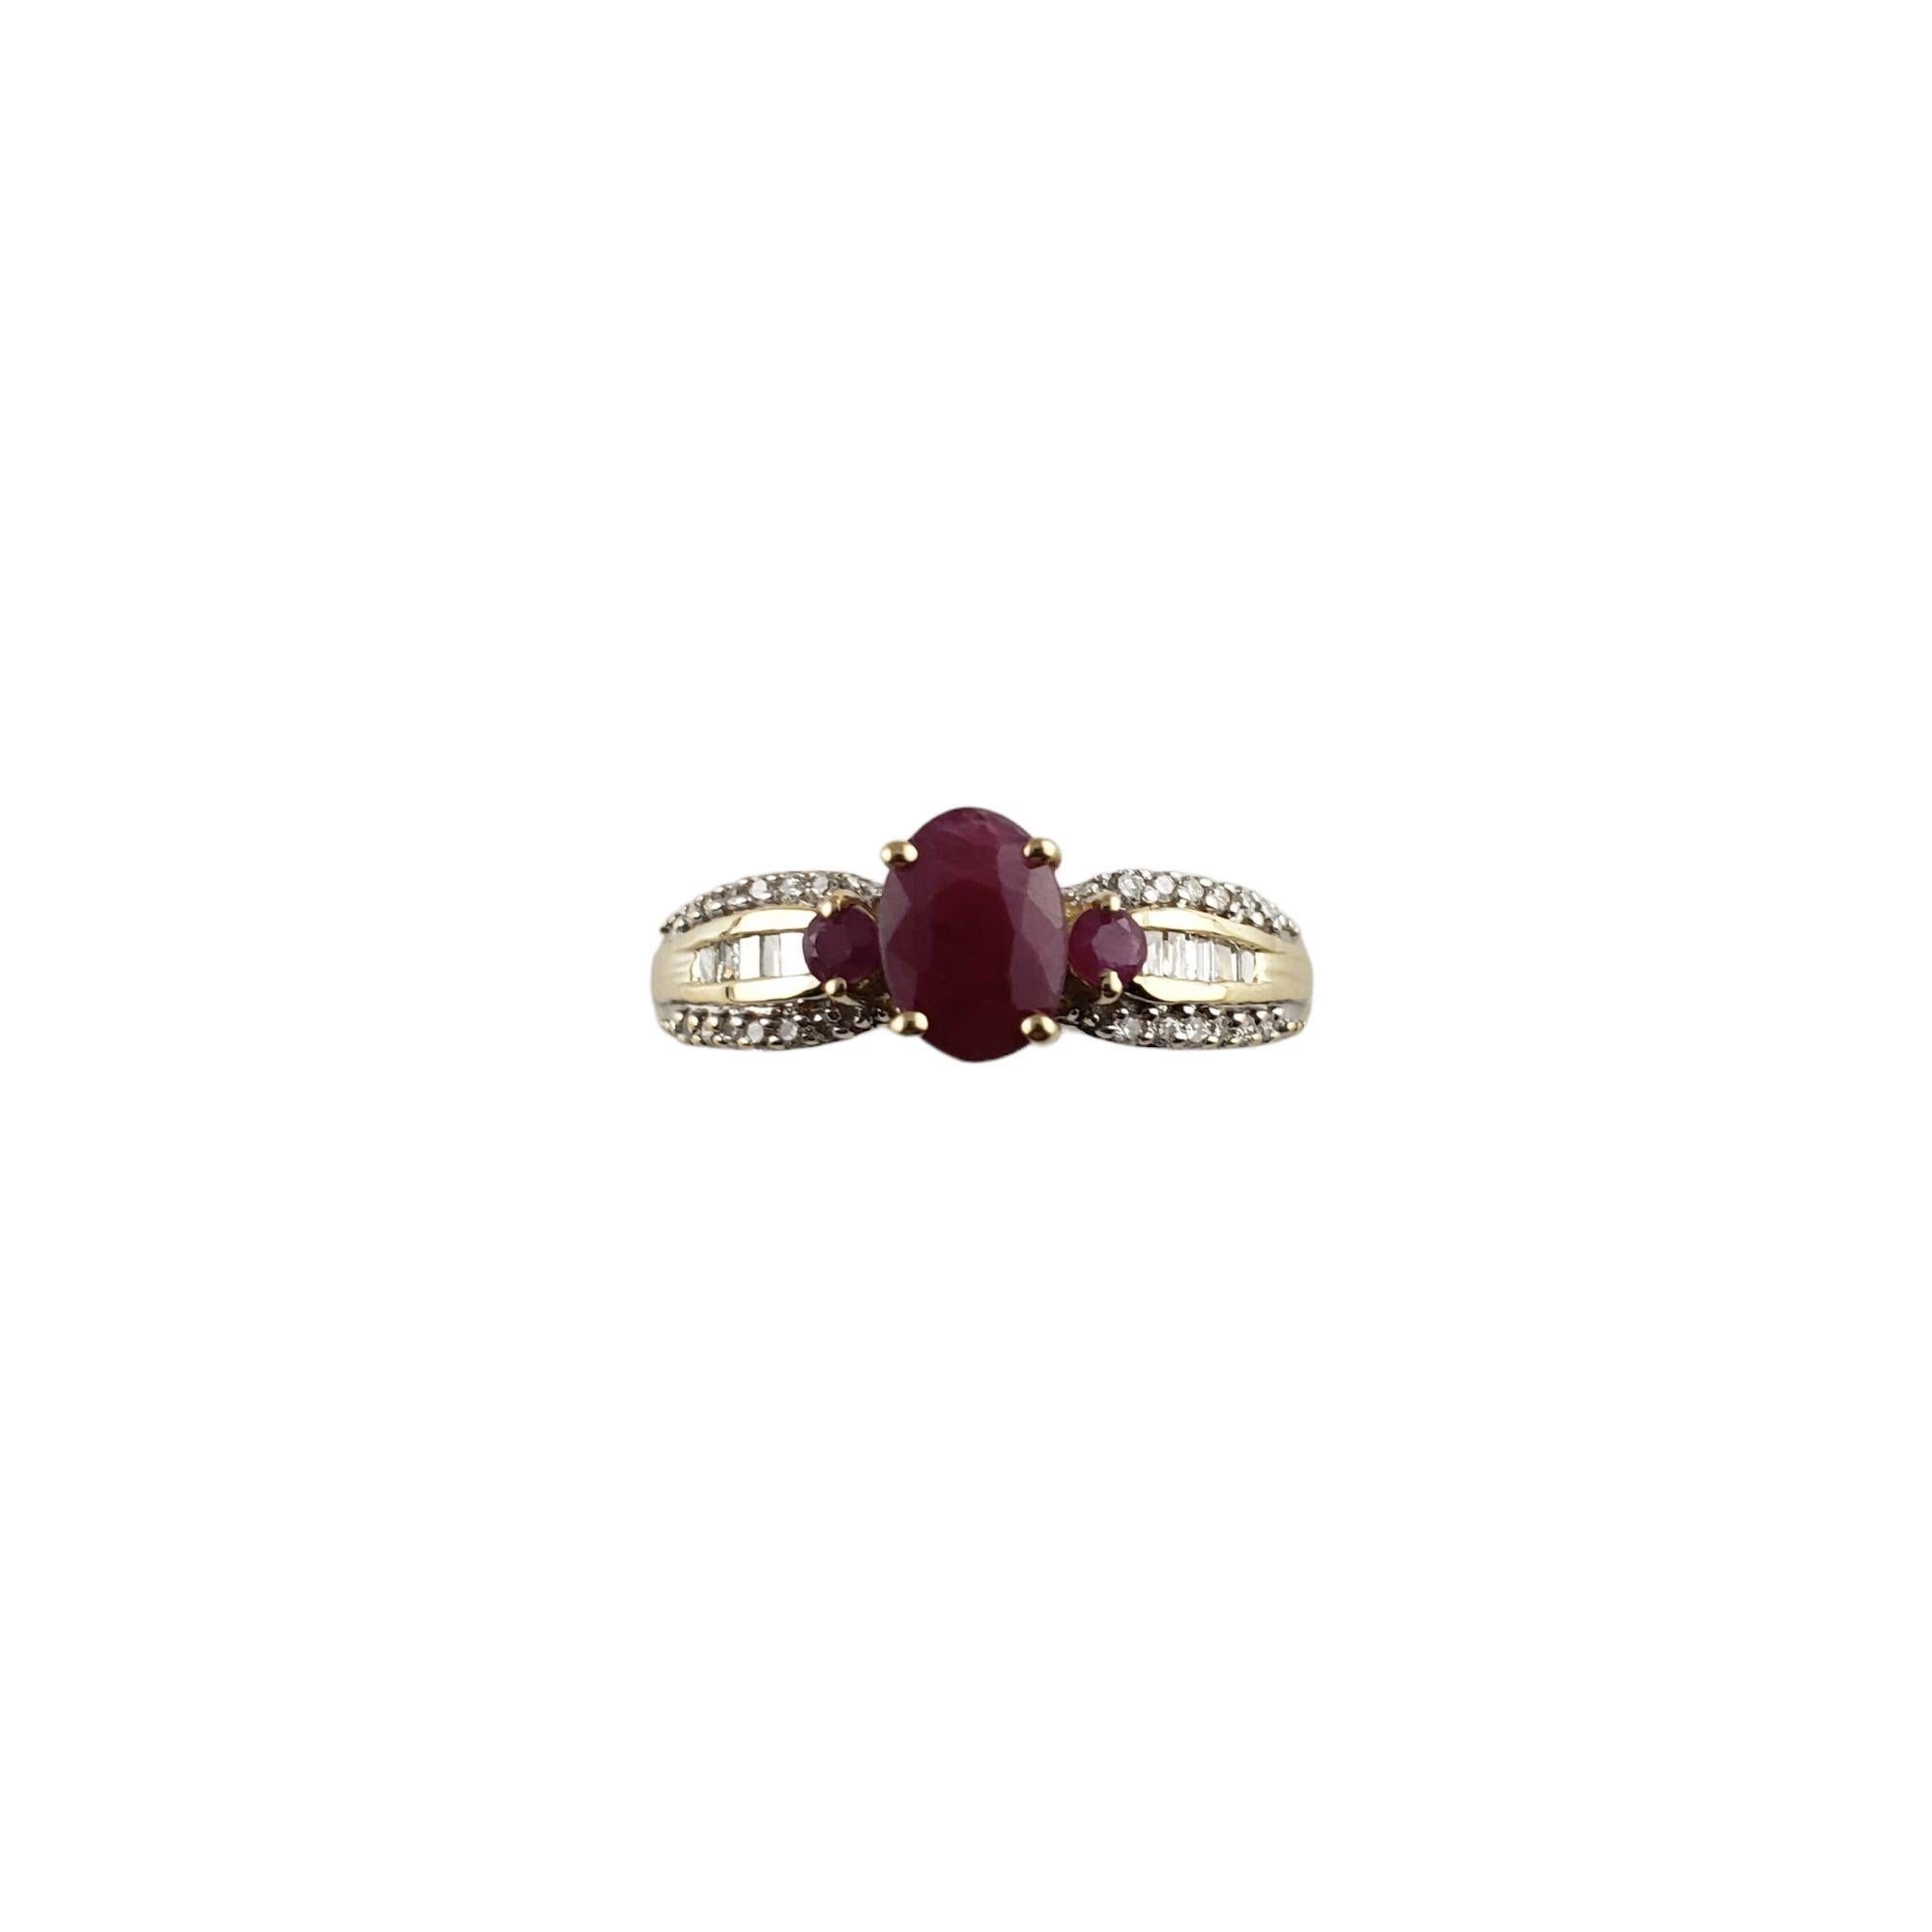 Vintage 10 Karat Yellow Gold Ruby and Diamond Ring Size 7.25-7.5

This lovely ring features three ruby gemstones, 24 round brilliant cut diamonds and ten baguette diamonds set in classic 10K yellow gold. Width: 7 mm. Shank: 2 mm.

Approximate total